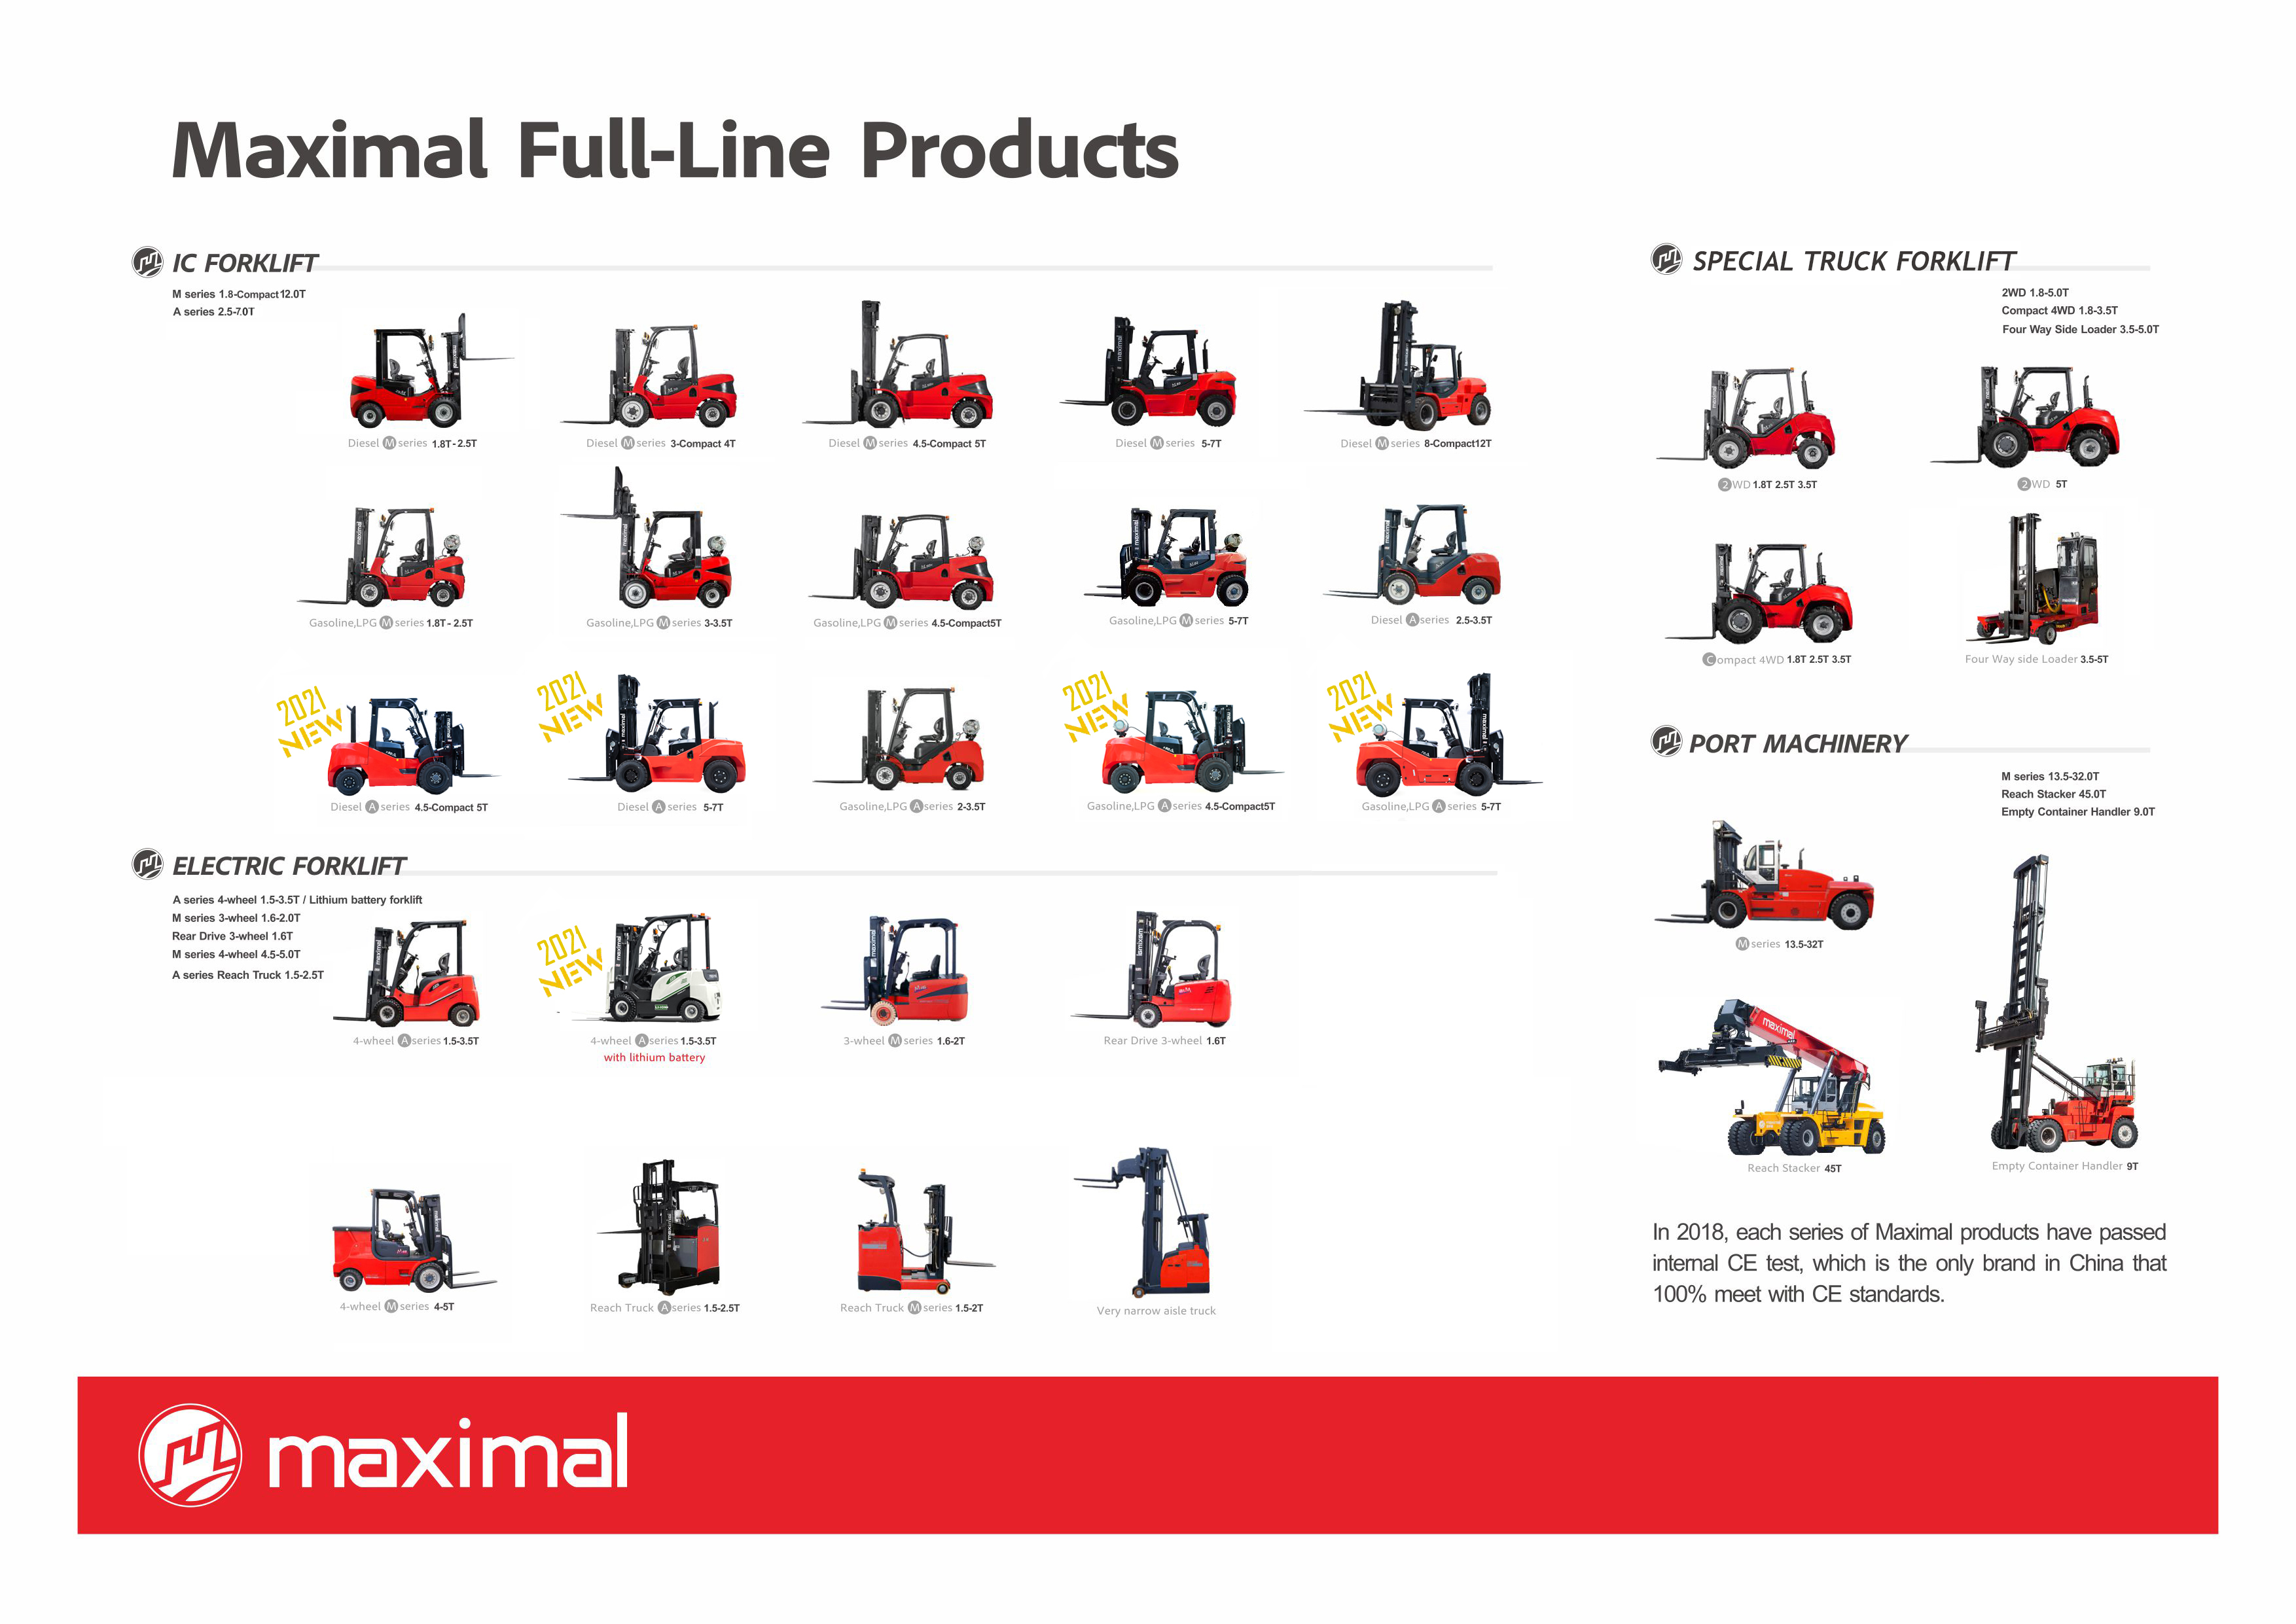 Maximal 2021 Full-Line Products Poster Launched